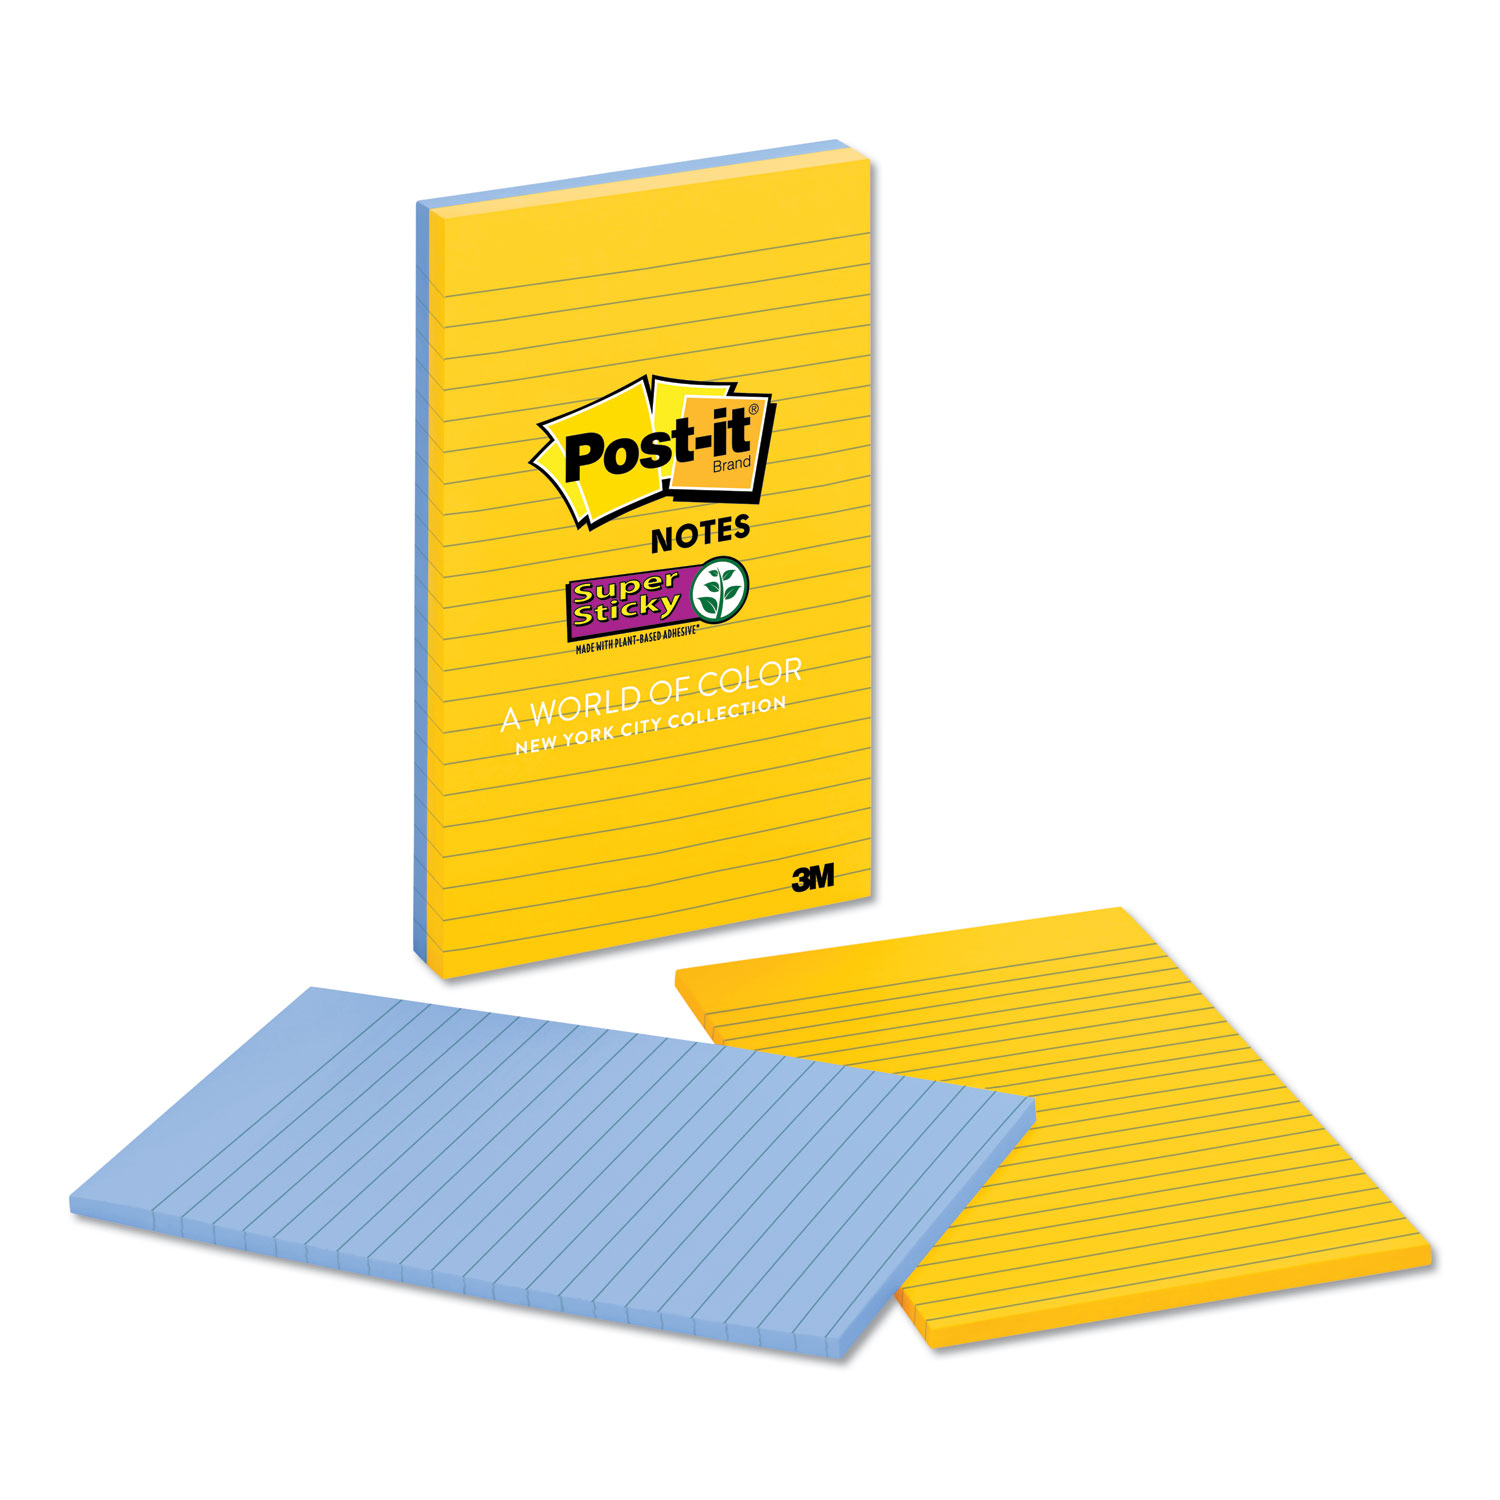  Post-it Notes Super Sticky 58452SSNY2 Pads in New York Colors, 5 x 8, 45-Sheet, 2/Pack (MMM58452SSNY2) 